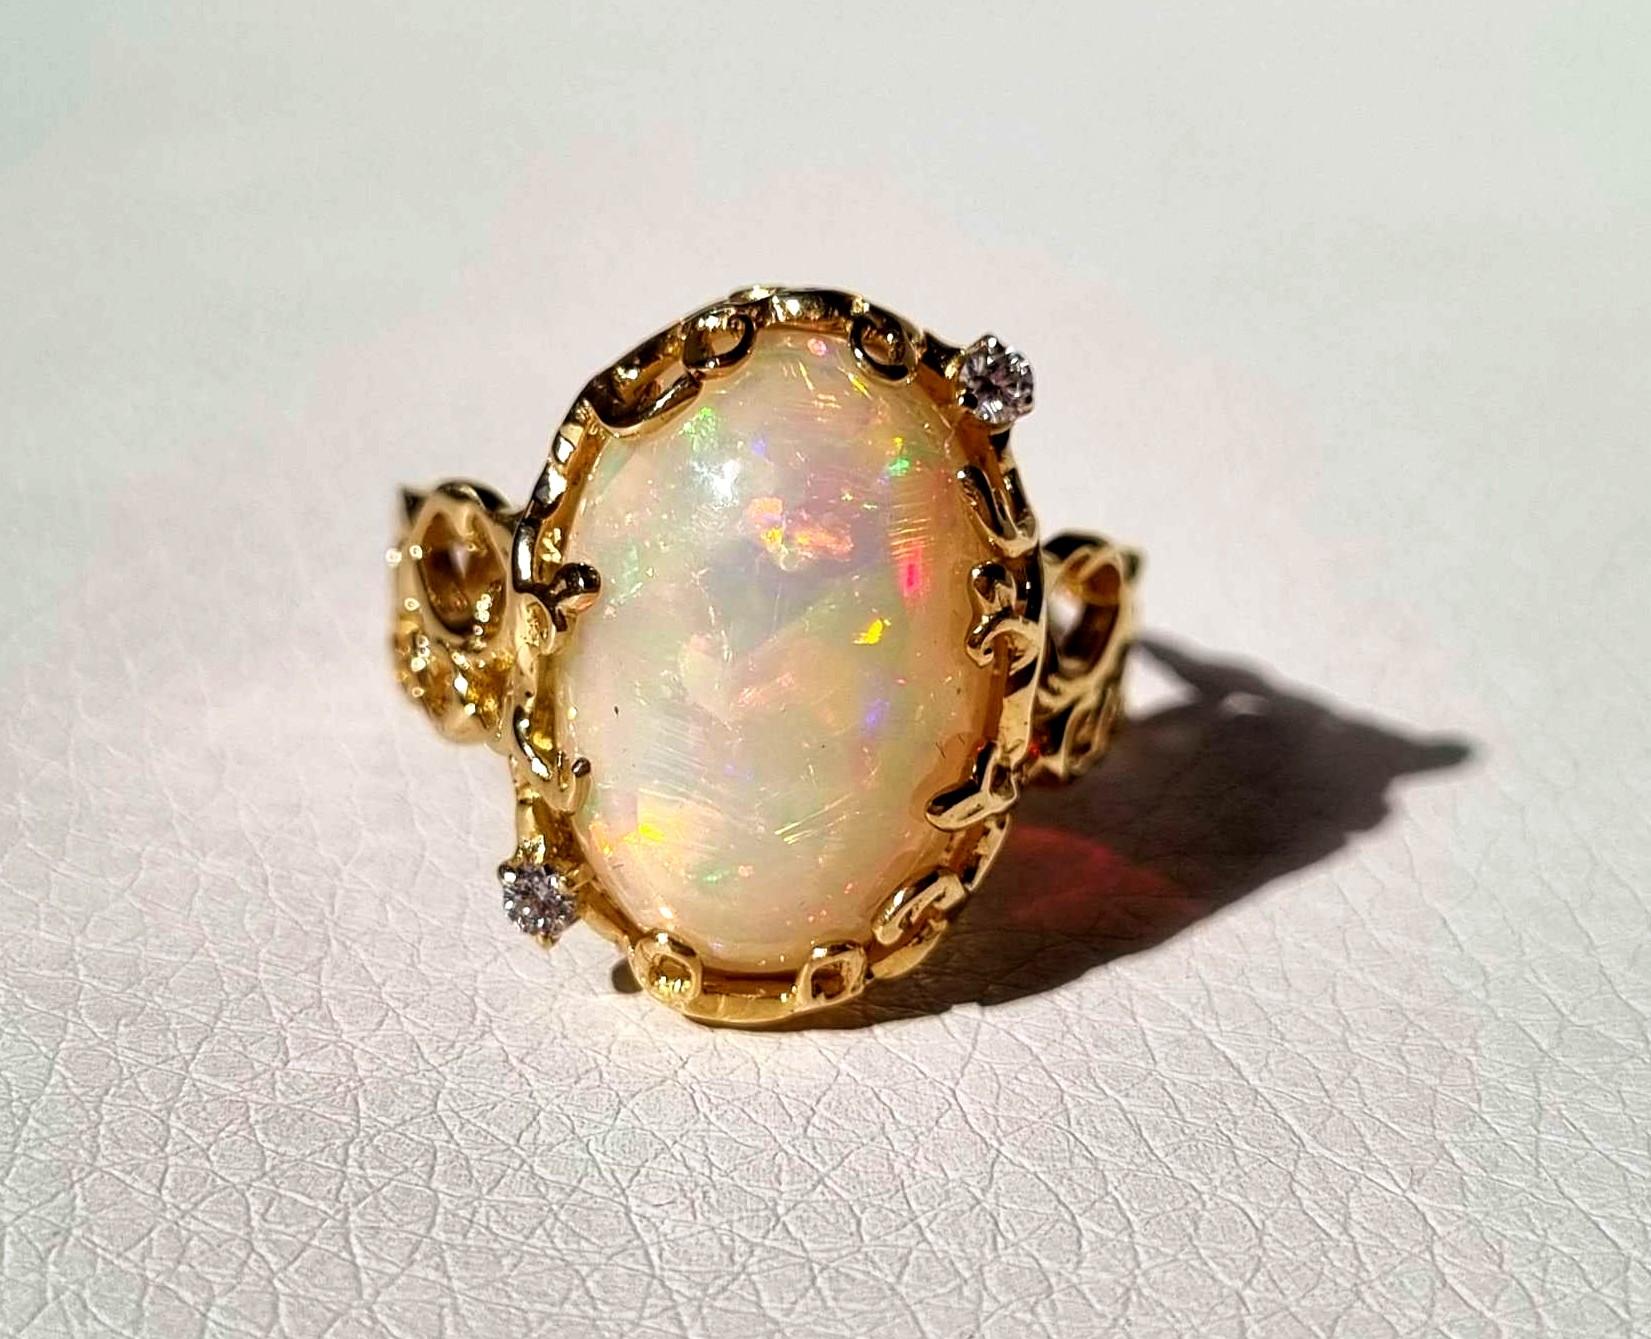 Material: 14k solid white gold
Ring custom made-to-order. Please take under consideration up to 3 weeks time of production, please

Main Stone Type: Ethiopian Opal, oval cut
Weight: 6.5 ct
Color: translucid, opalescent
Treatment: N/A

Secondary